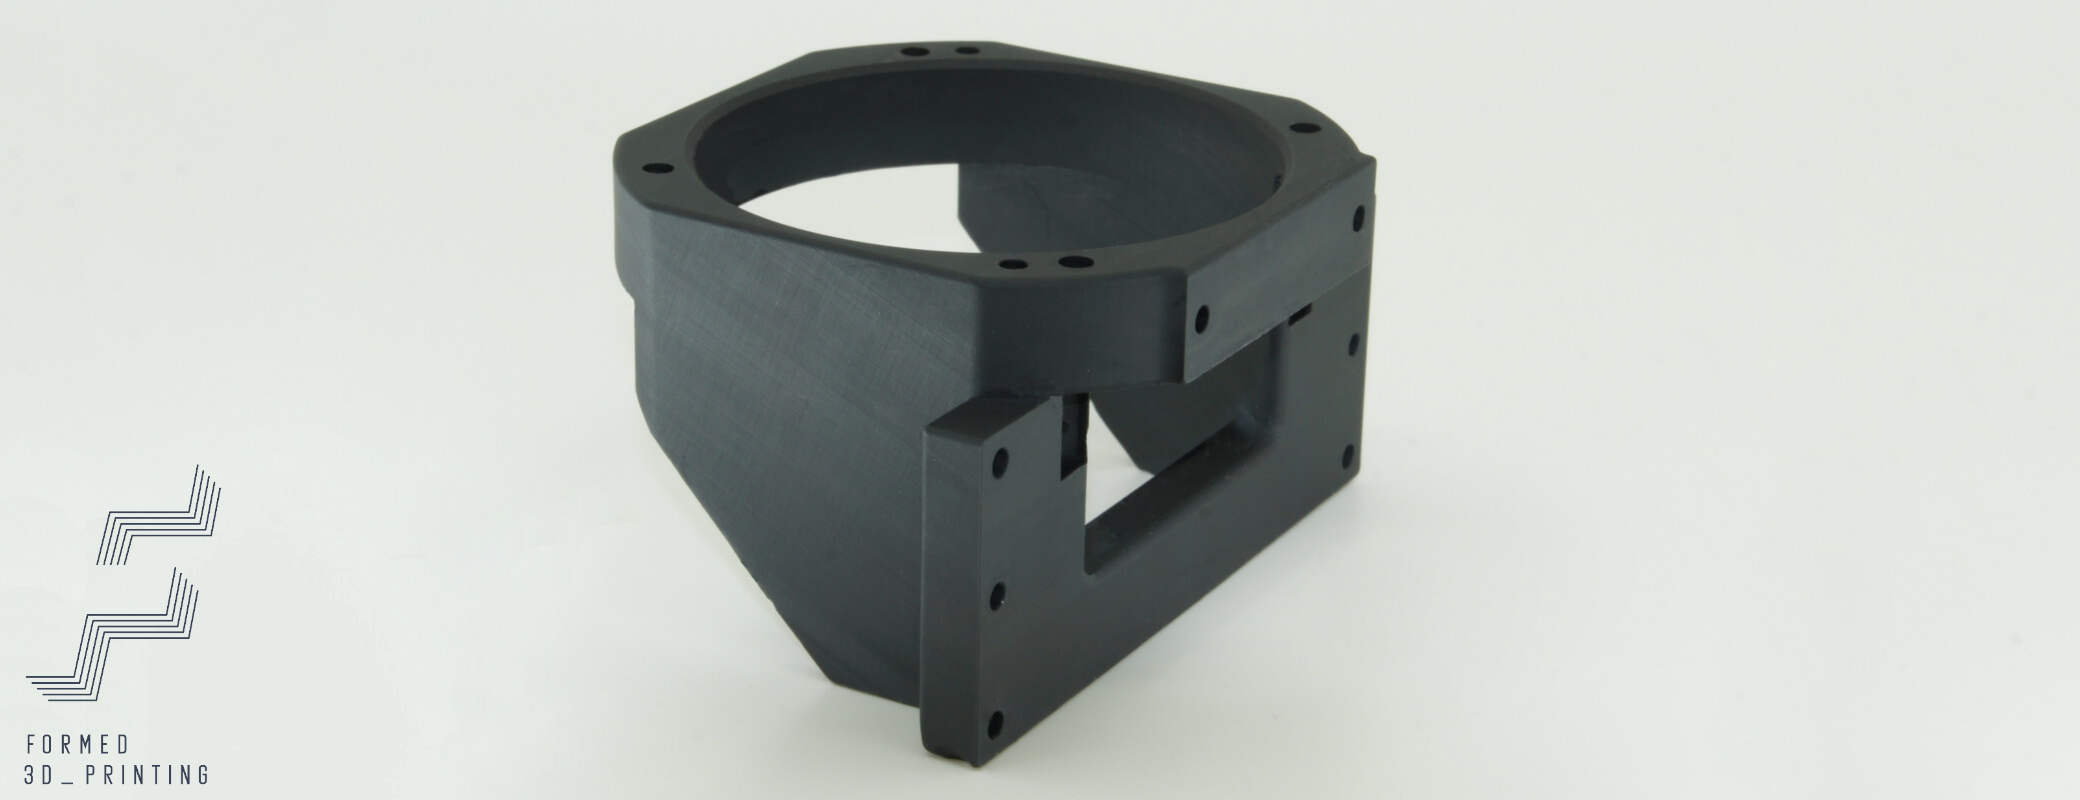 3d printing service, Oculox Technologies trusts FORMED for 3D printing of high resolution functional parts